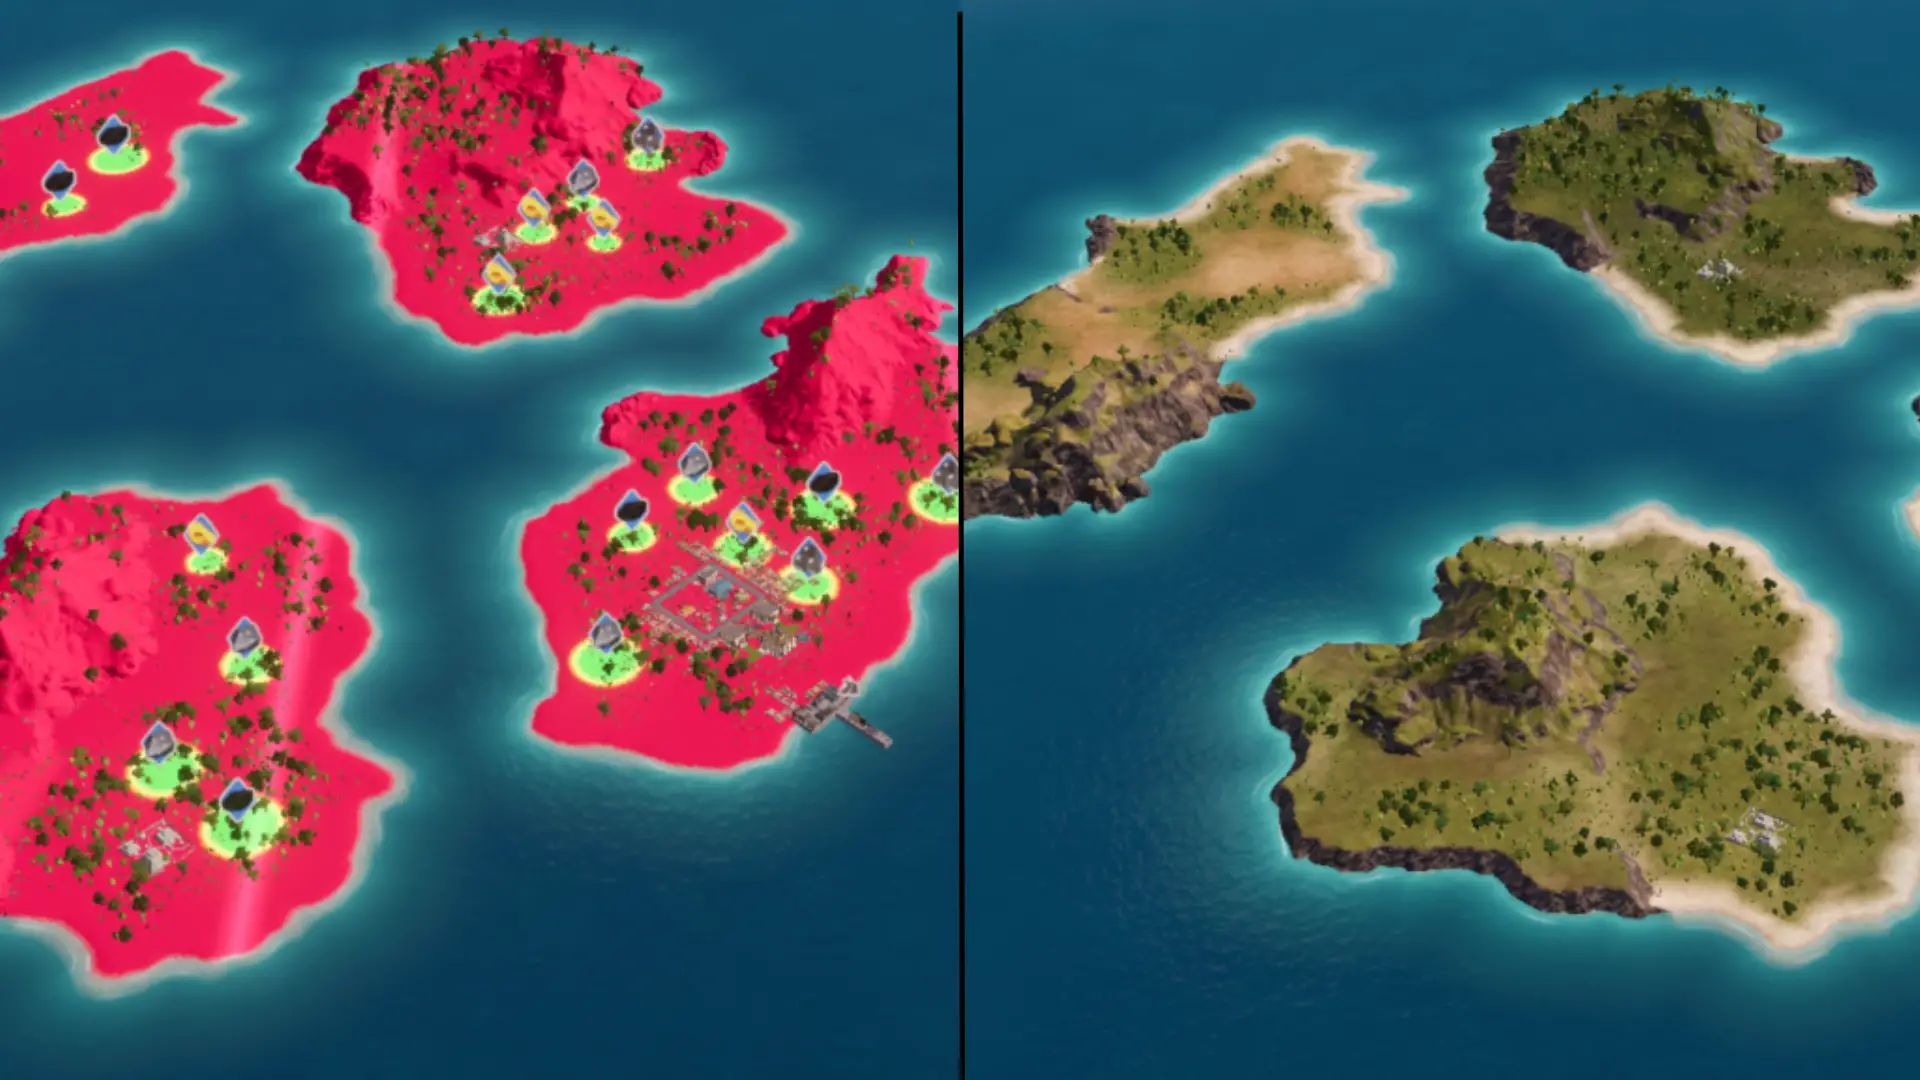 [NEW] Here's the Best Tropico 6 Seeds